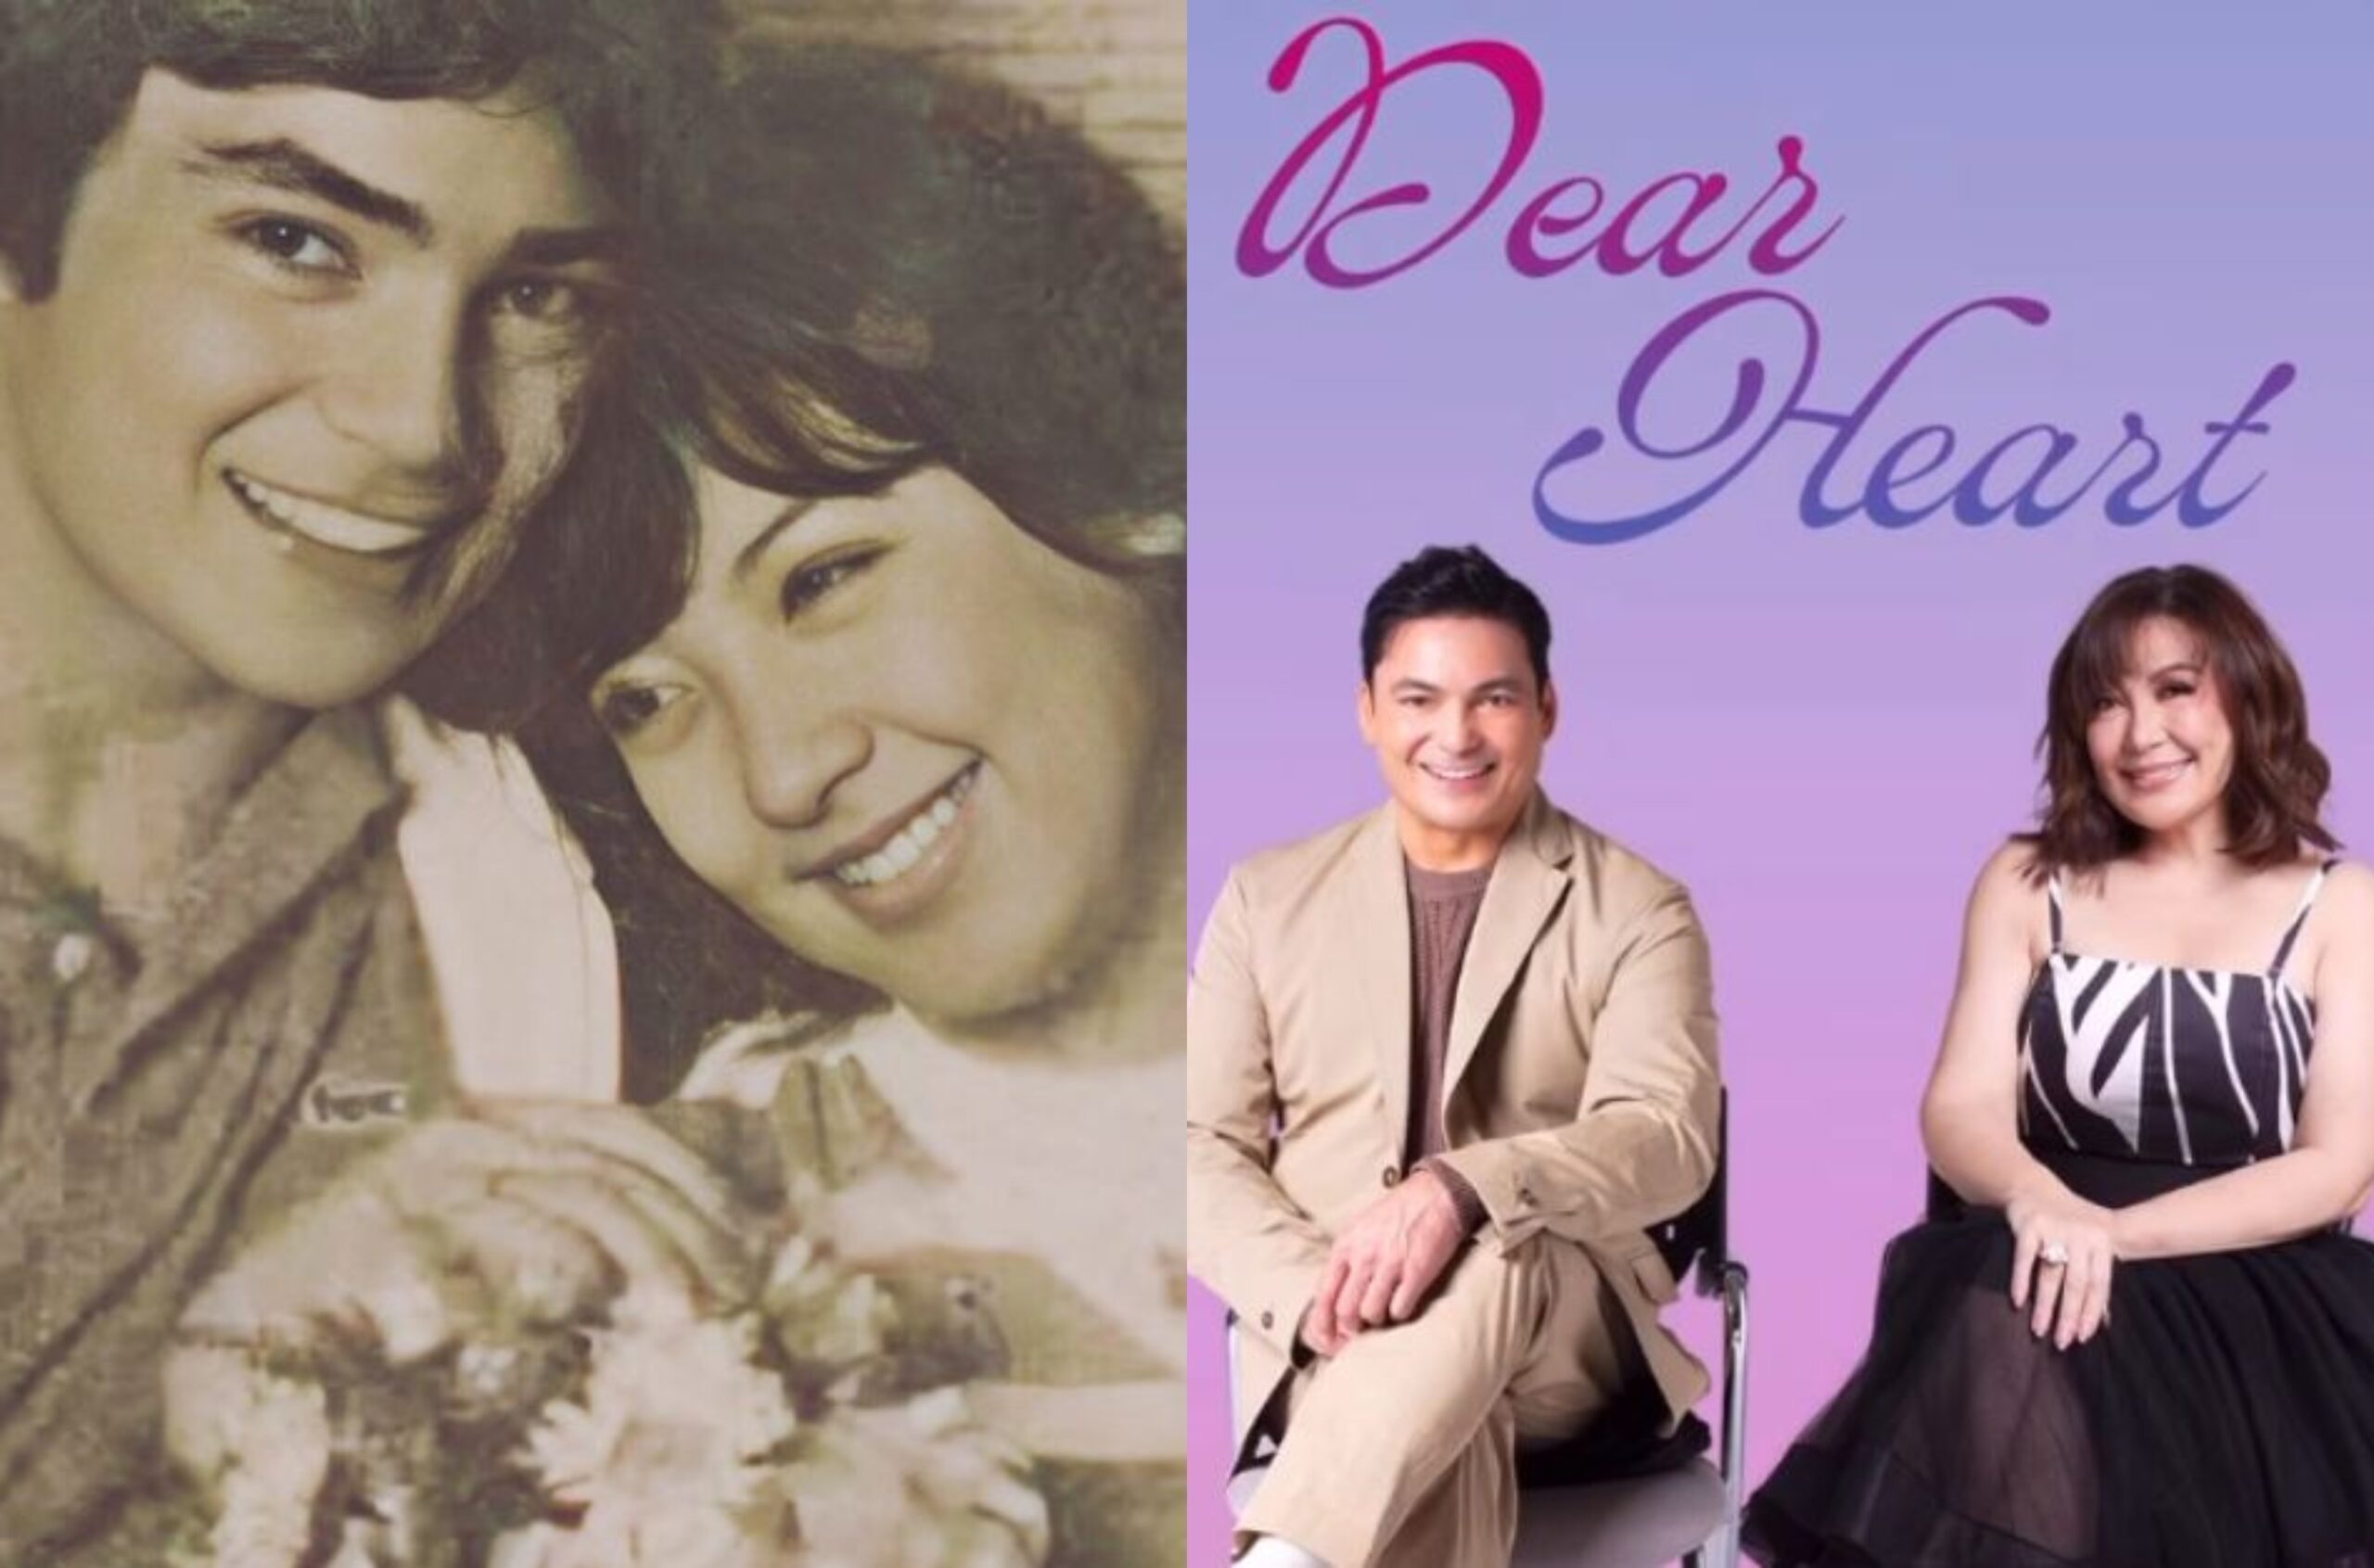 LOOK: Sharon Cuneta, Gabby Concepcion to hold reunion concert in October